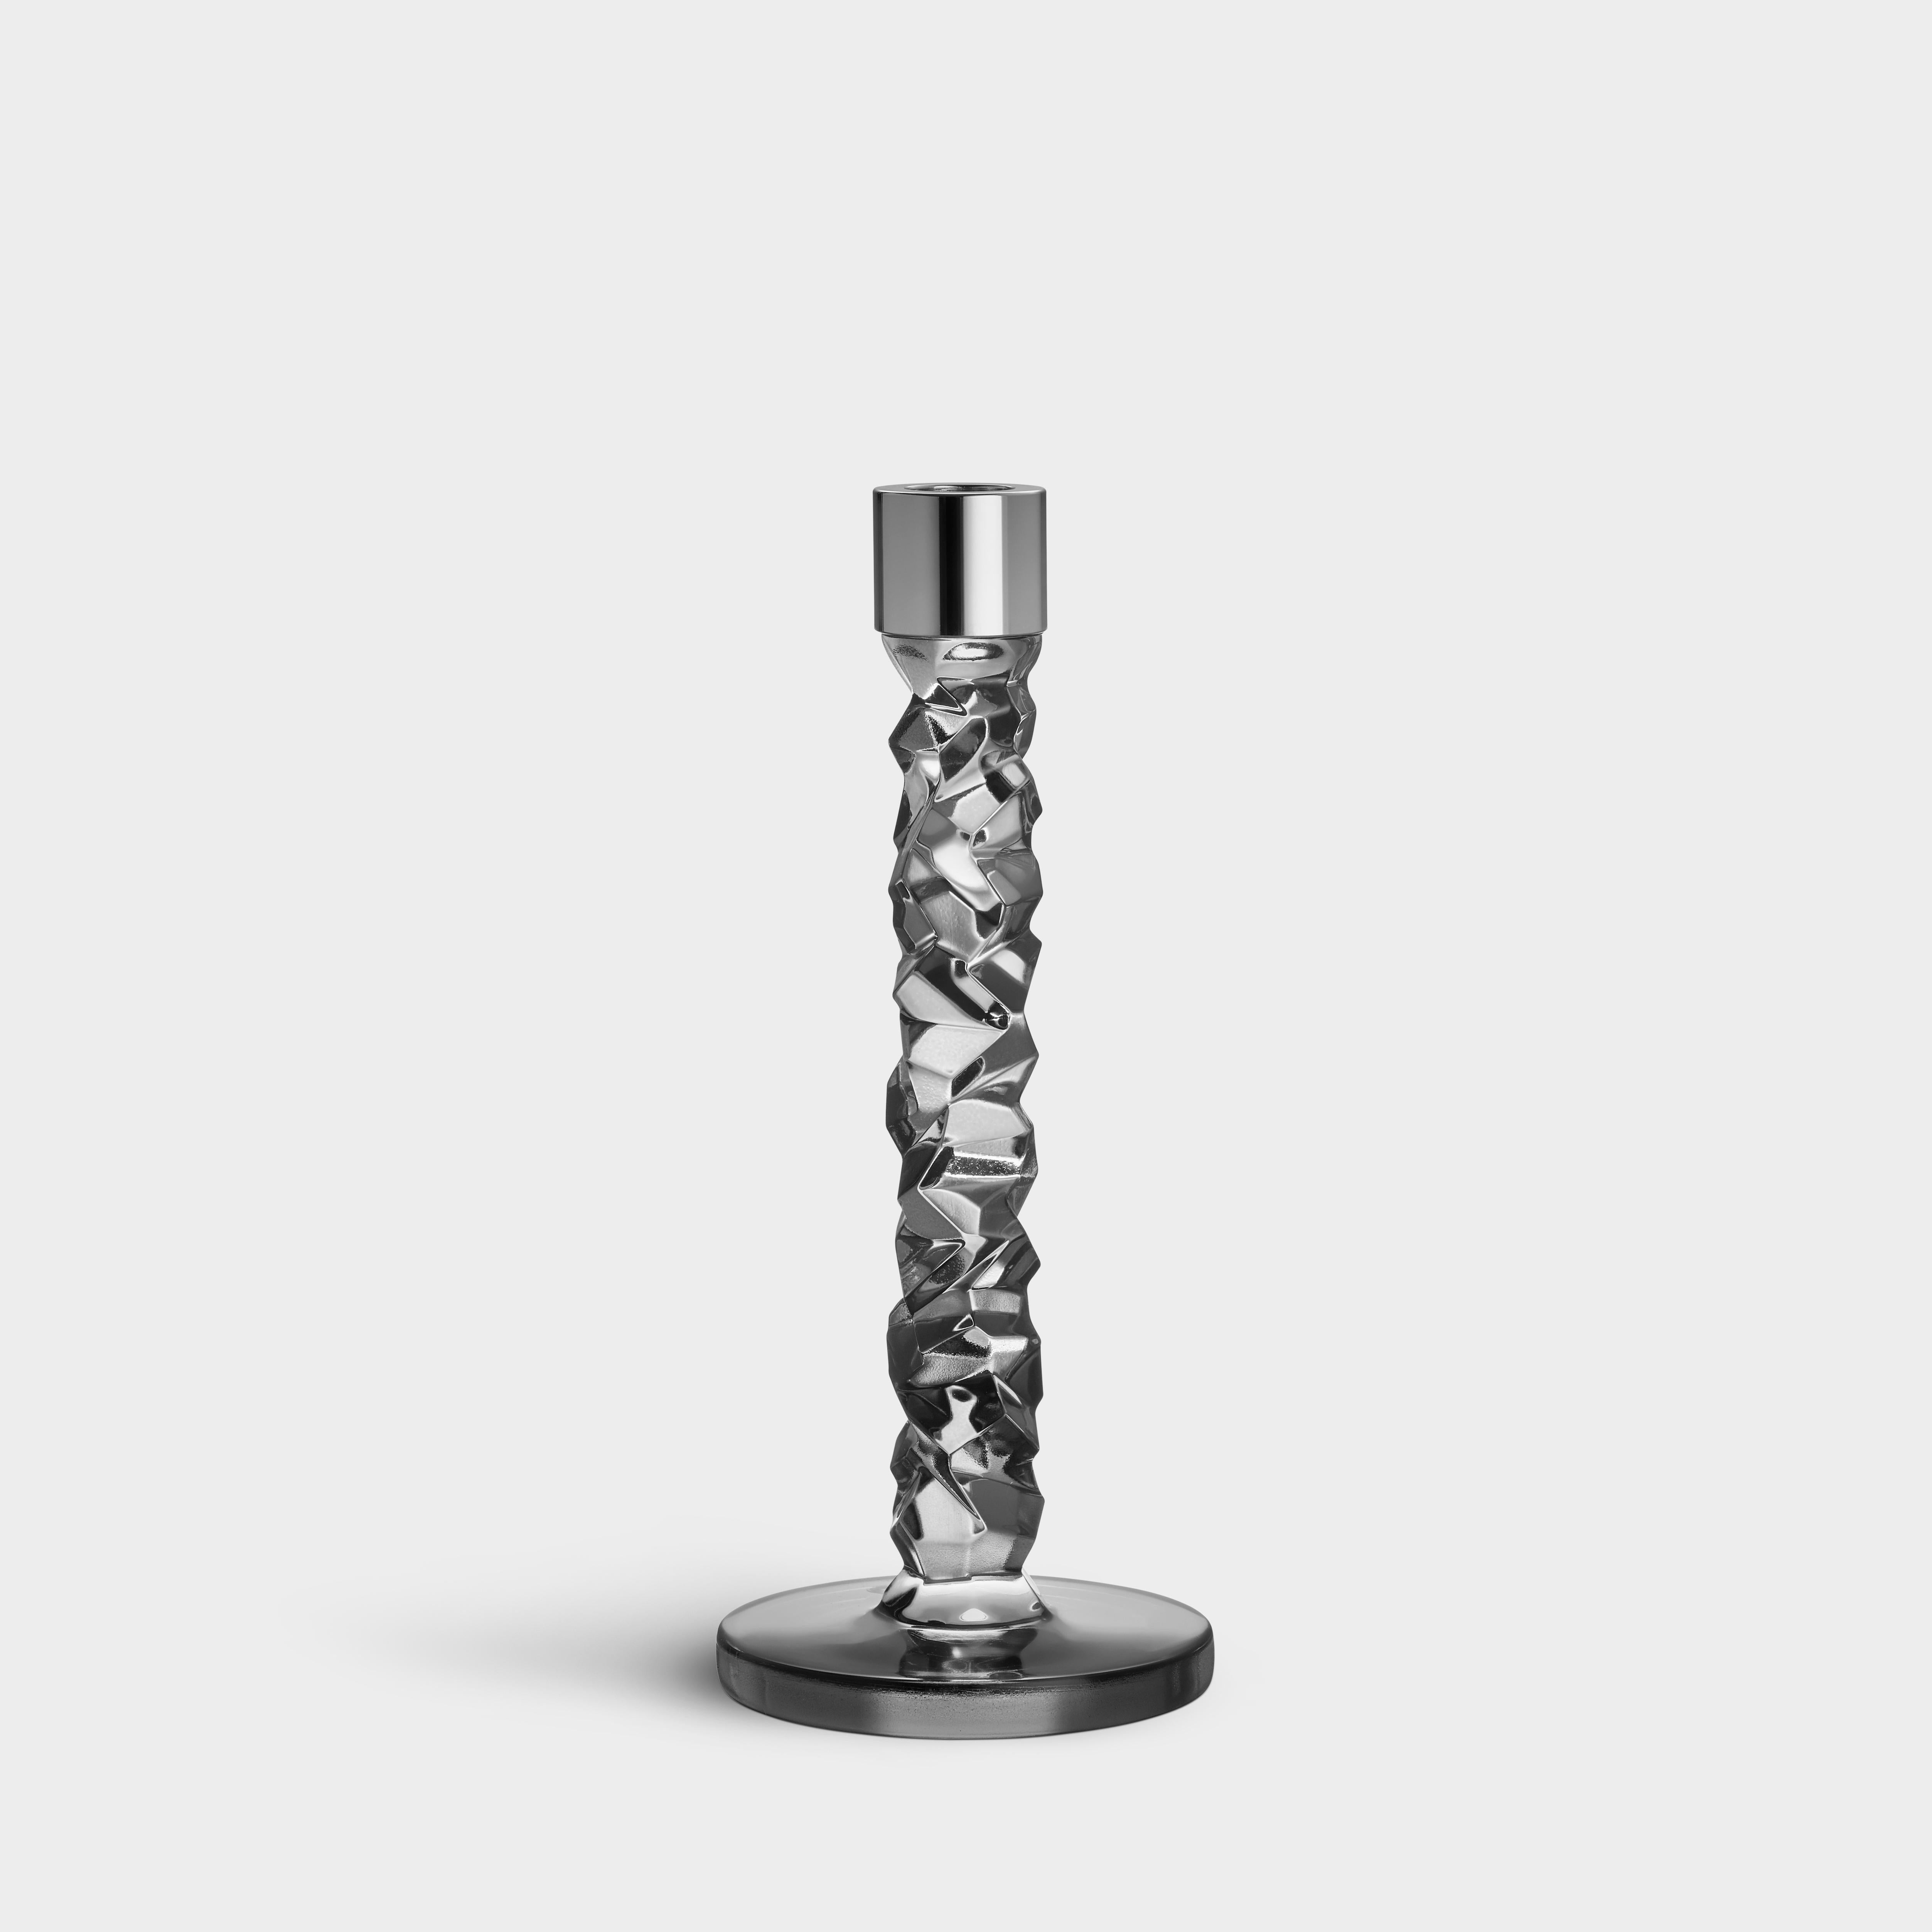 The Carat collection is based on a contemporary interpretation of the traditional cut glass for which Orrefors is world-renowned. The irregular geometry produces beautiful reflections of light in the crystal. The medium candlestick in the color